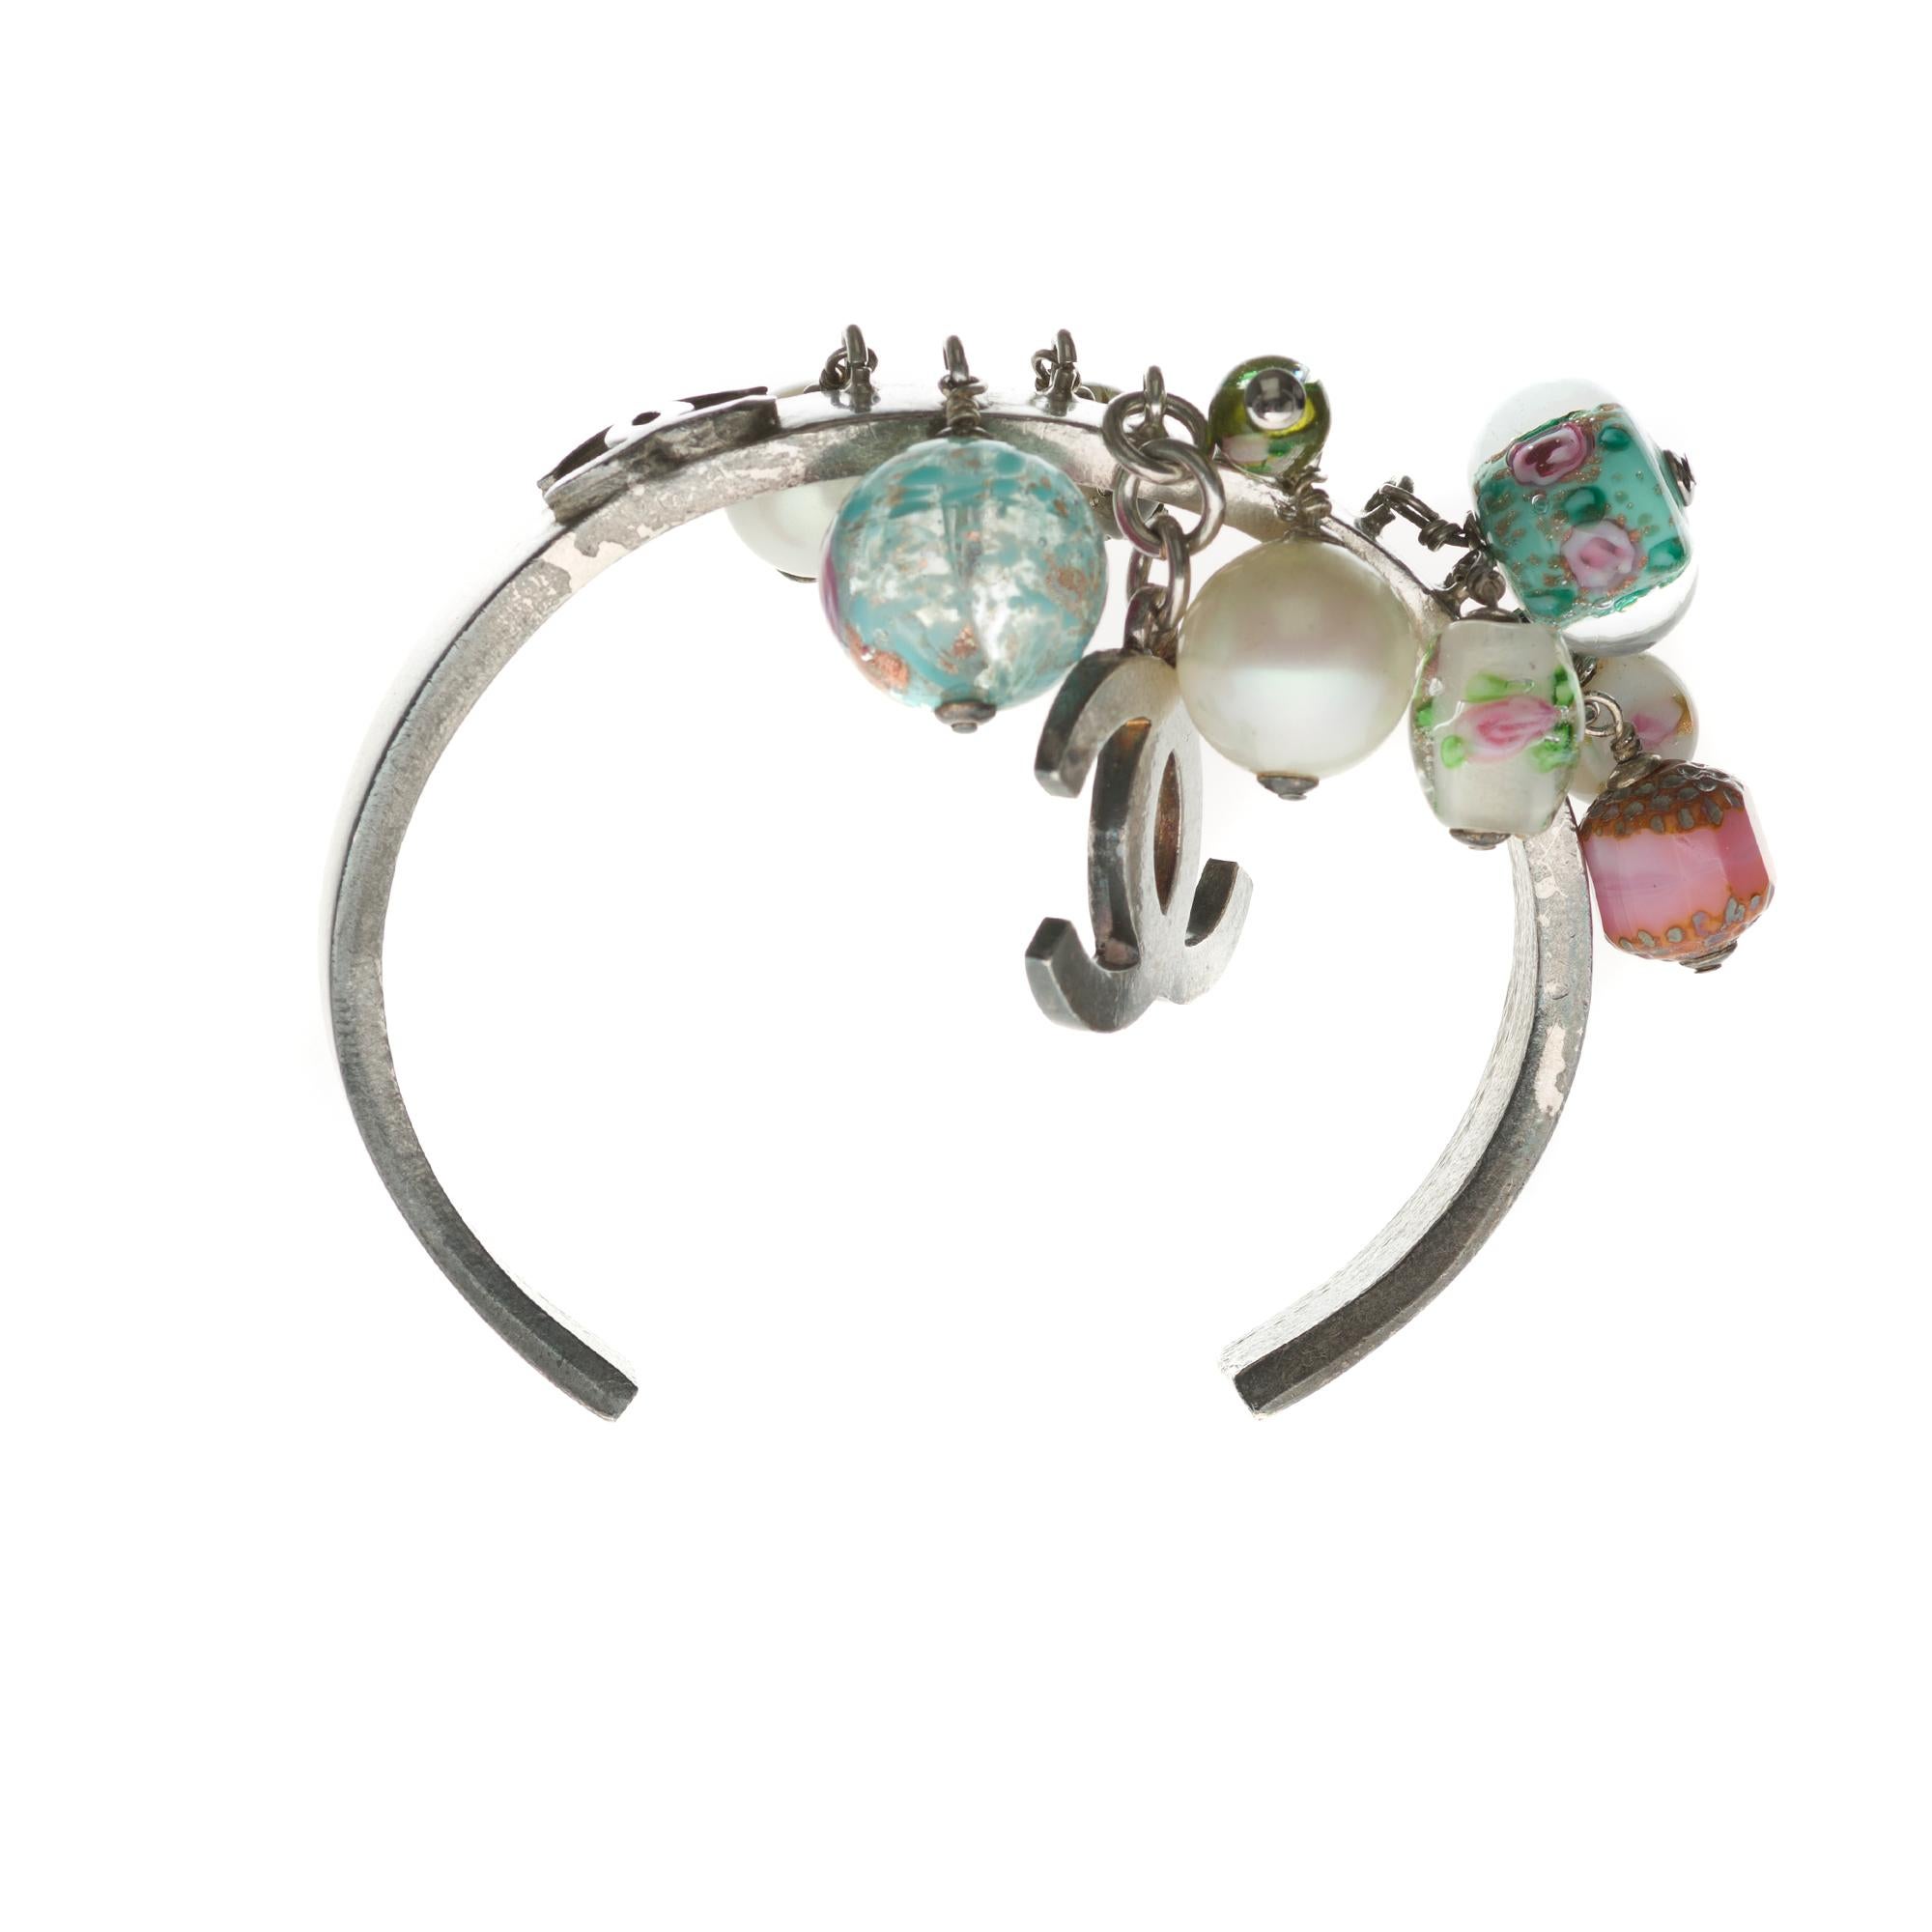 Silver metal cuff bracelet with charms in multicoloured pearls and fancy stones, matched with a silver metal CC.
Strap width in the middle: 6cm.
Width base cuff: 3cm

In good general condition despite signs of wear on metal and charms.